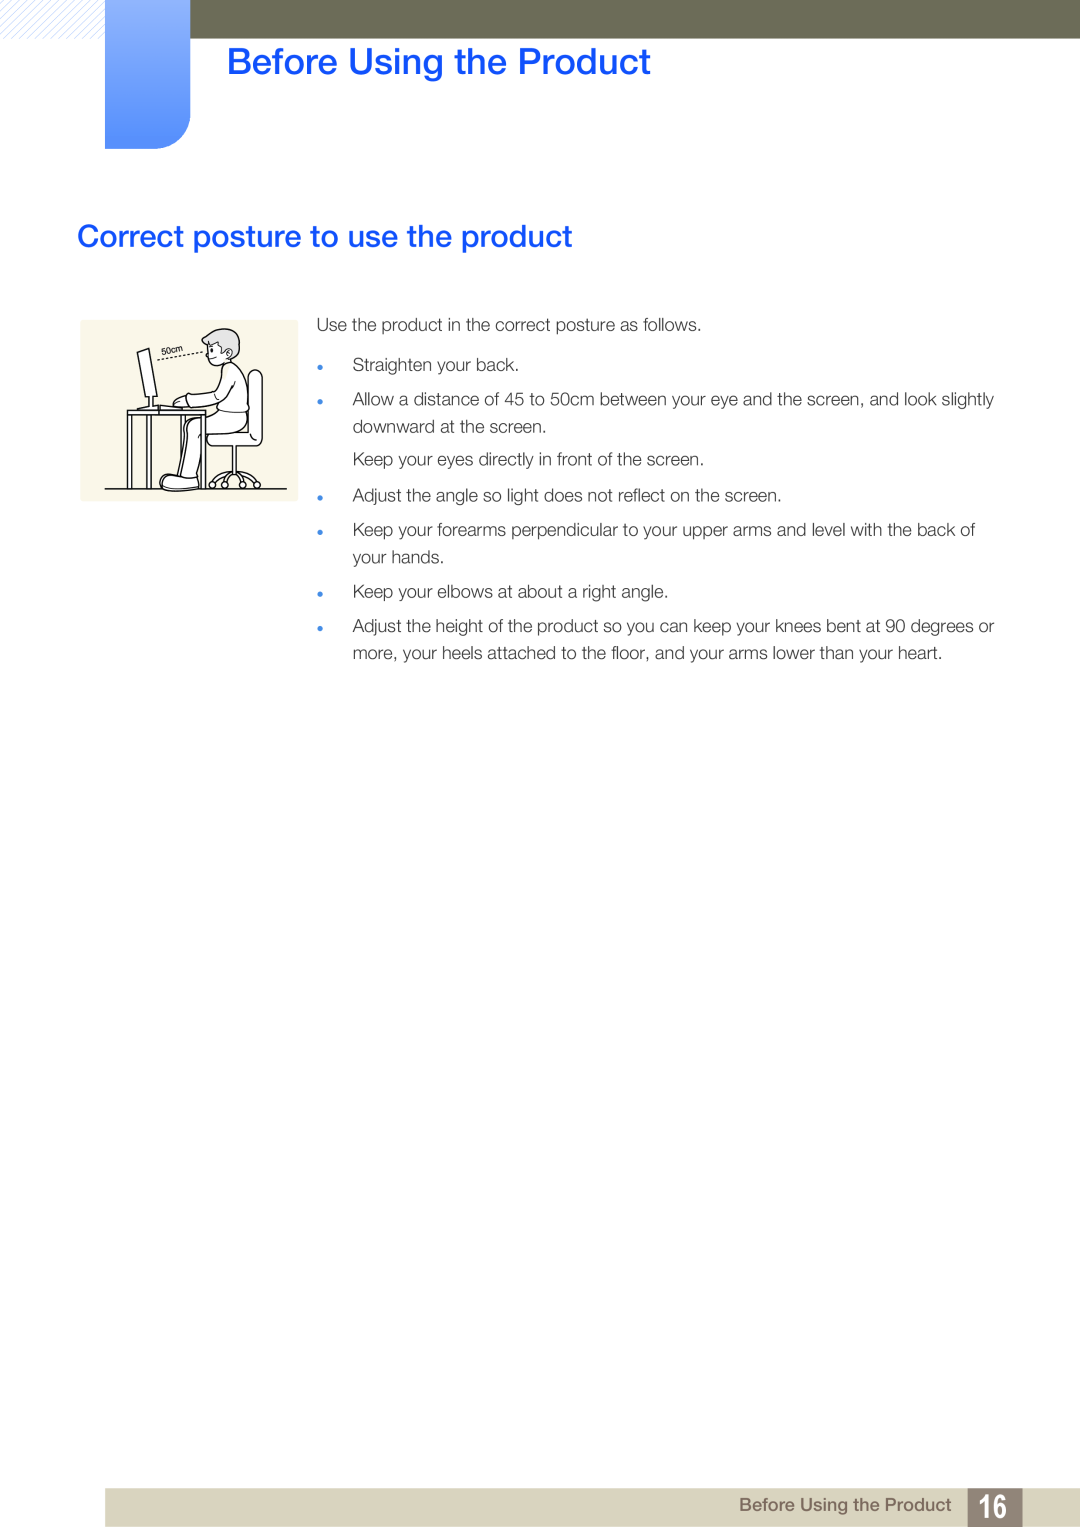 Samsung LS19B310ES/AF, LS19B310ES/ZN, LS19B310ES/SM manual Correct posture to use the product, Before Using the Product 